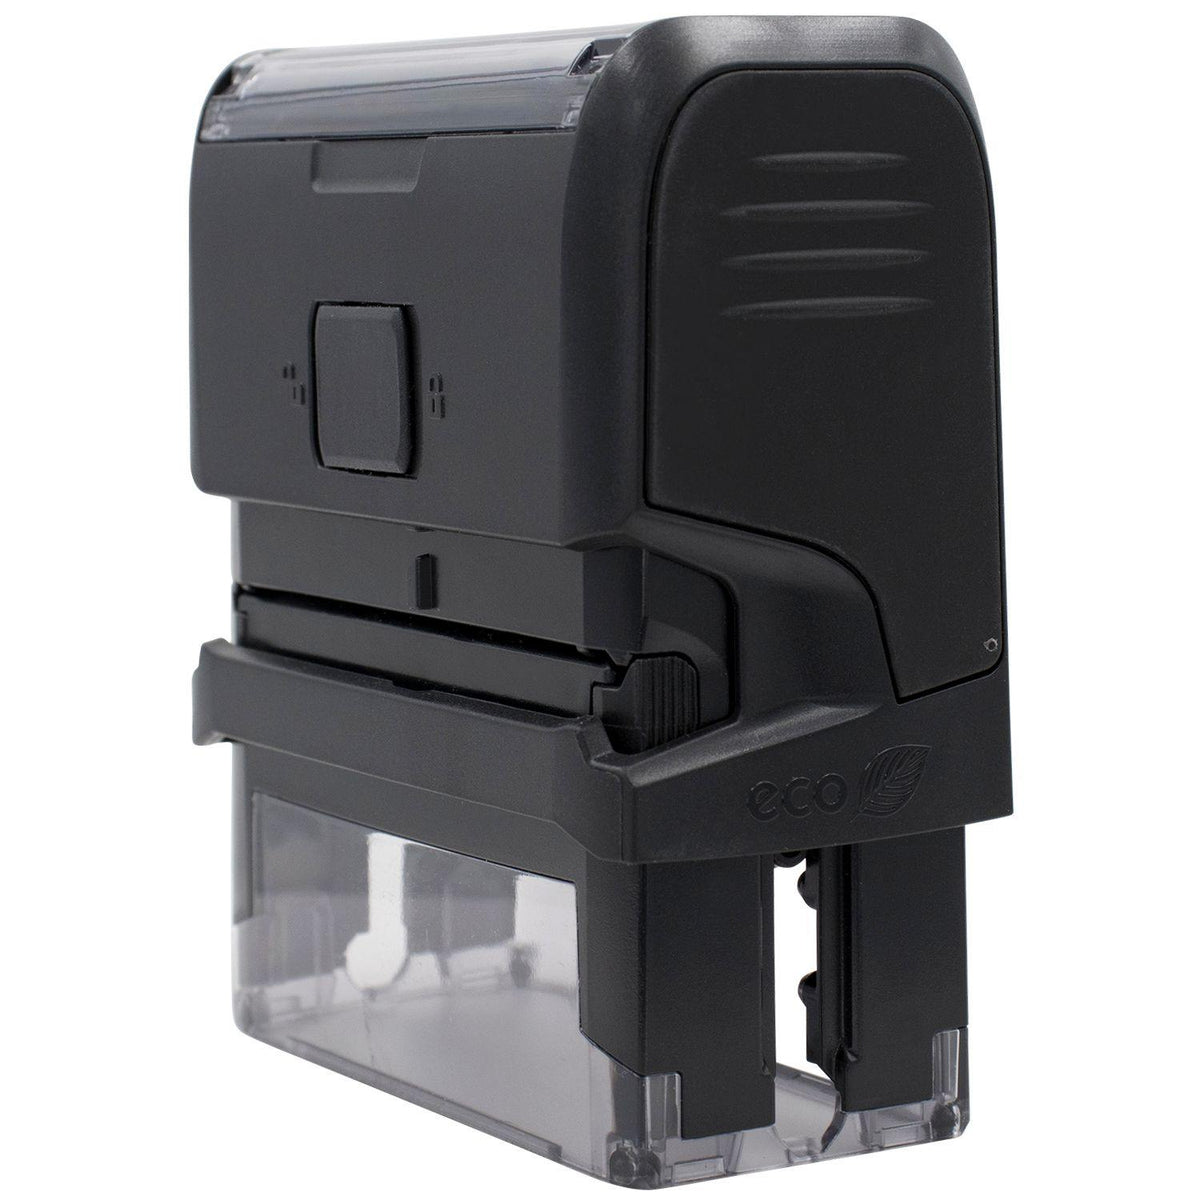 Self-Inking Classified Stamp - Engineer Seal Stamps - Brand_Trodat, Impression Size_Small, Stamp Type_Self-Inking Stamp